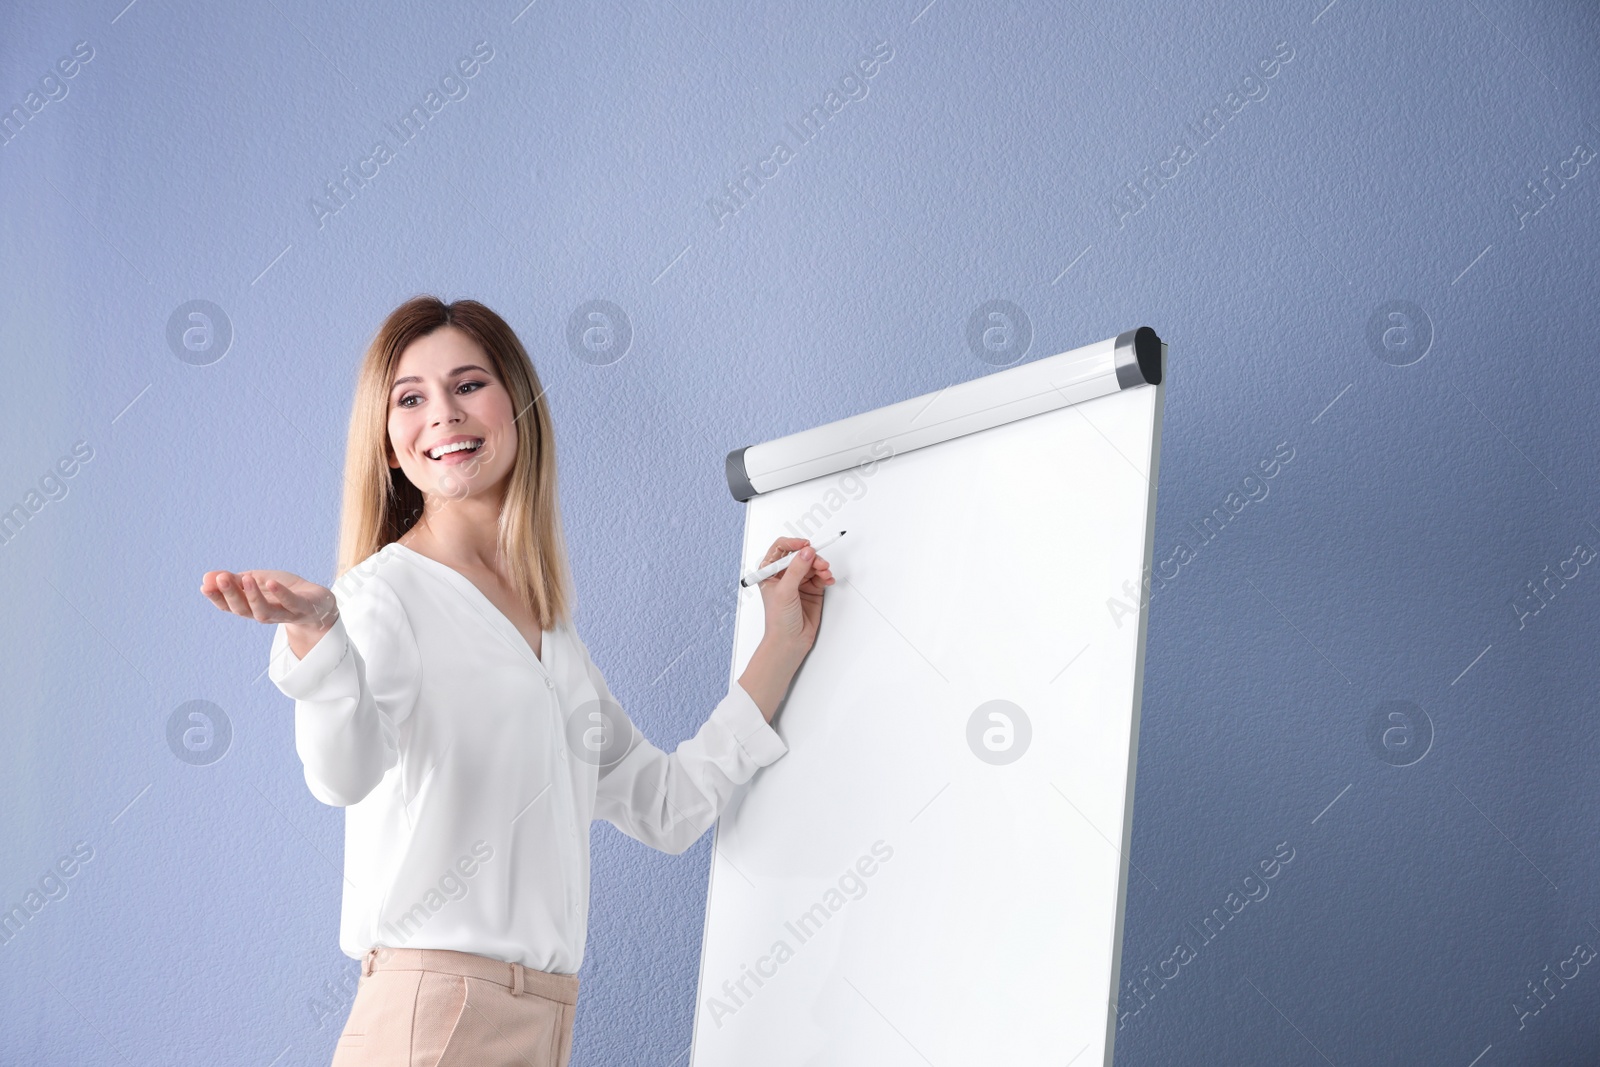 Photo of Female business trainer giving presentation against color background